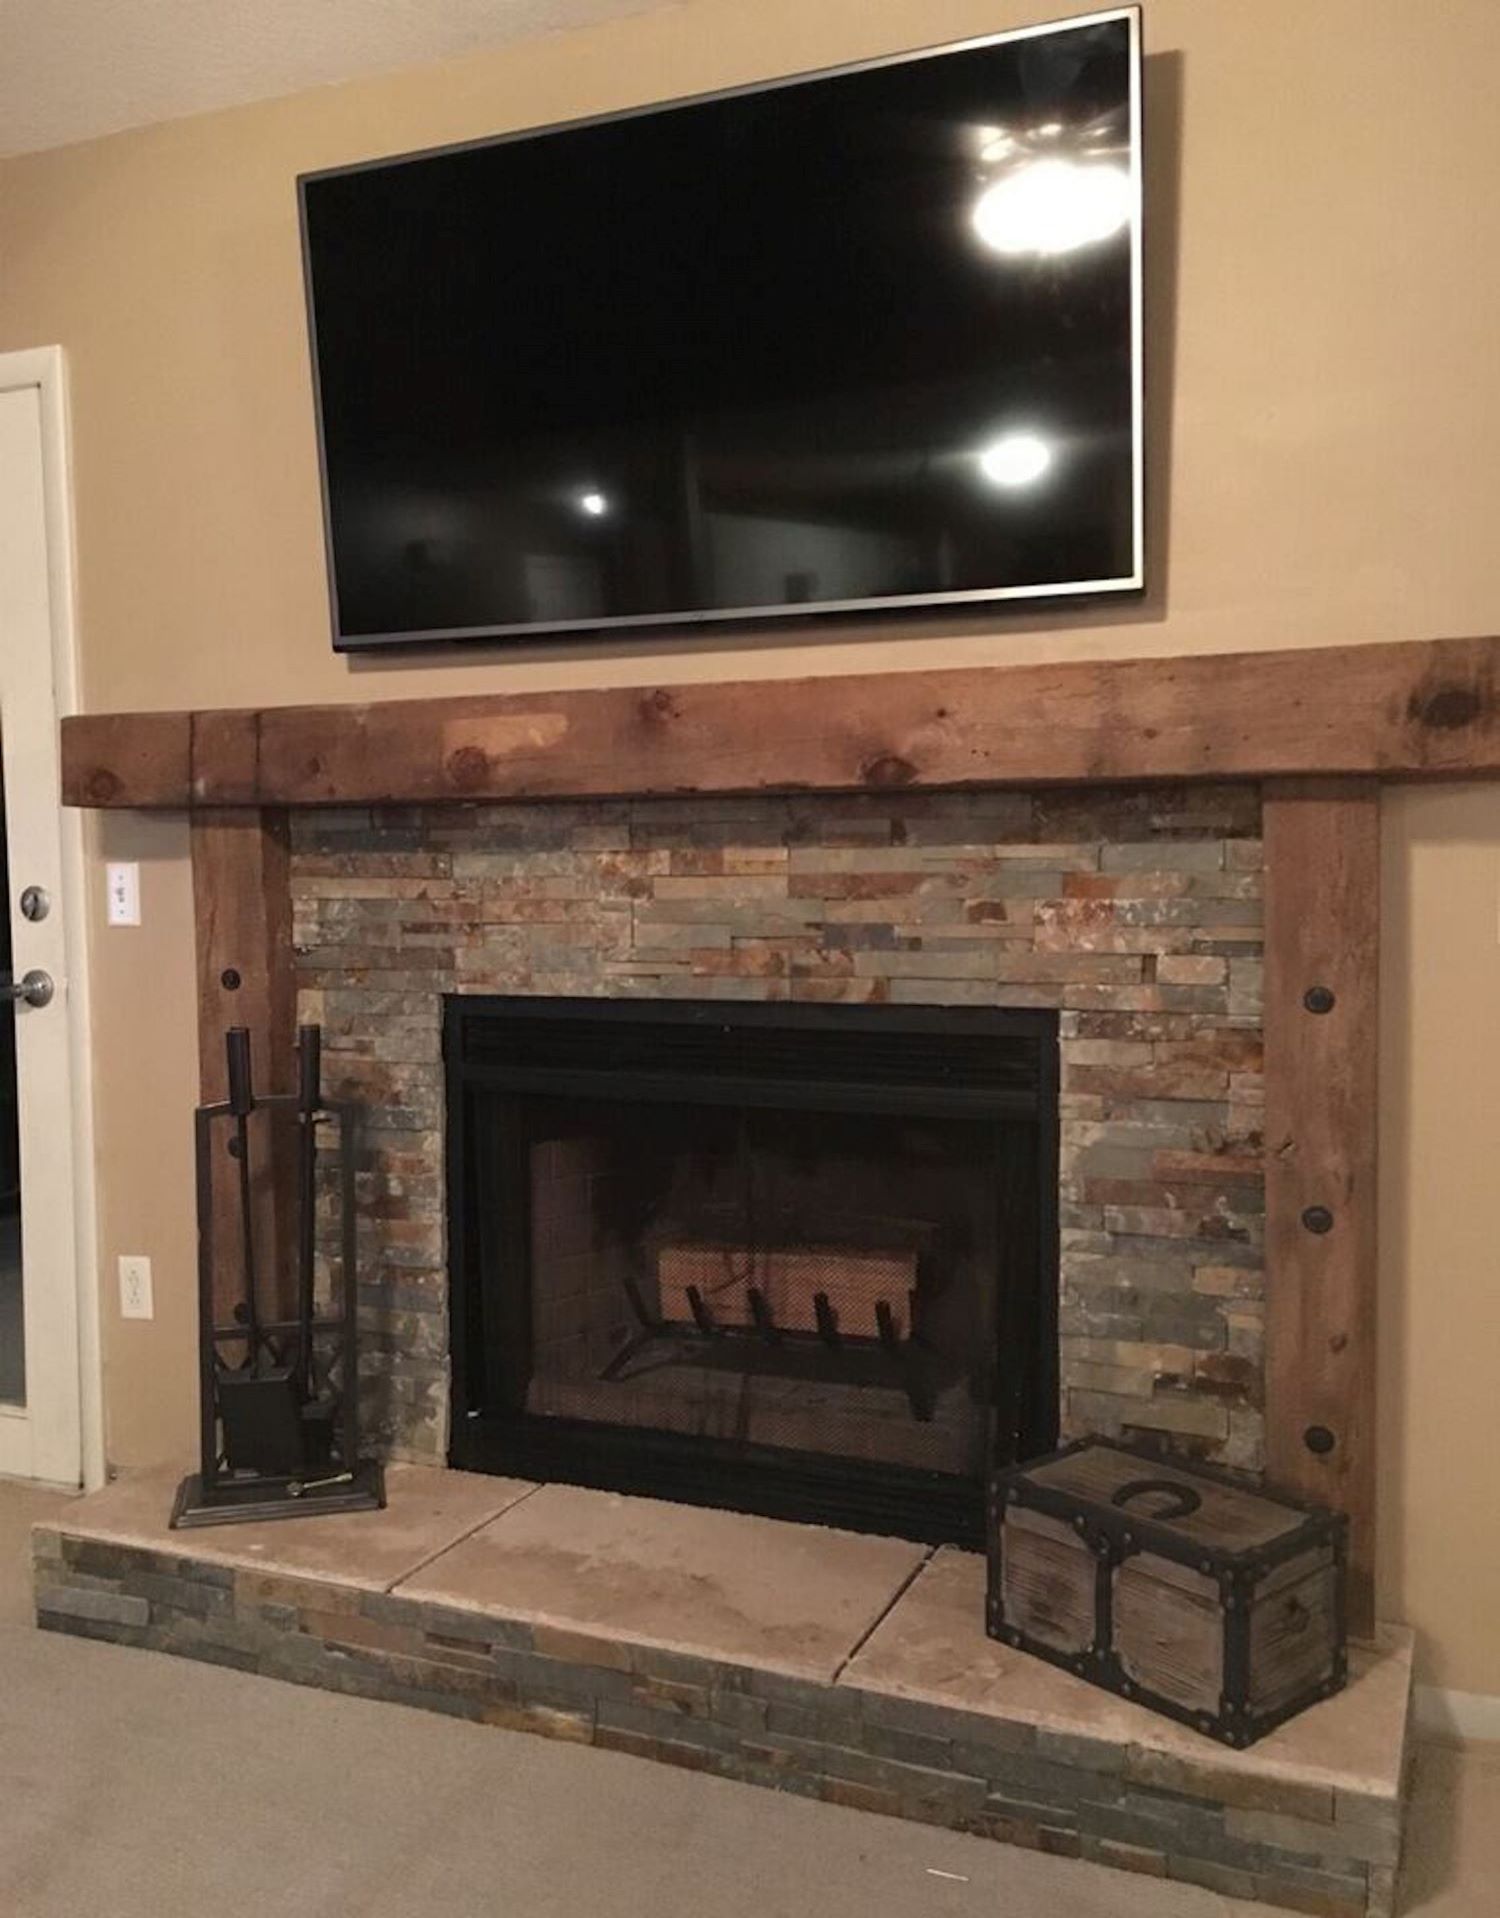 Barn beam mantle above a stone fireplace